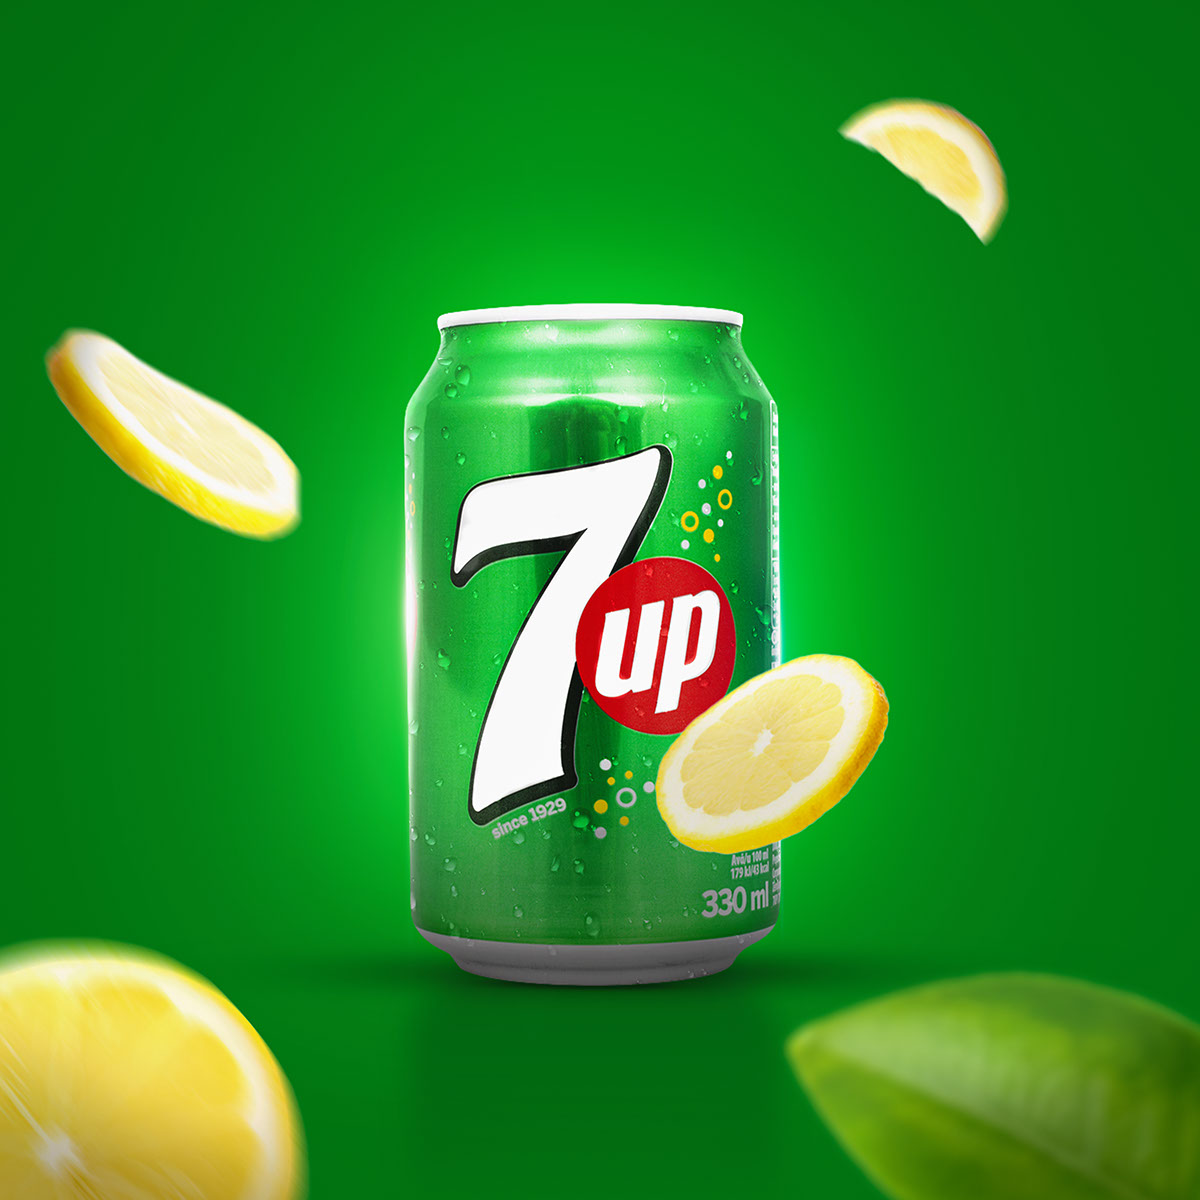 7Up rendition image